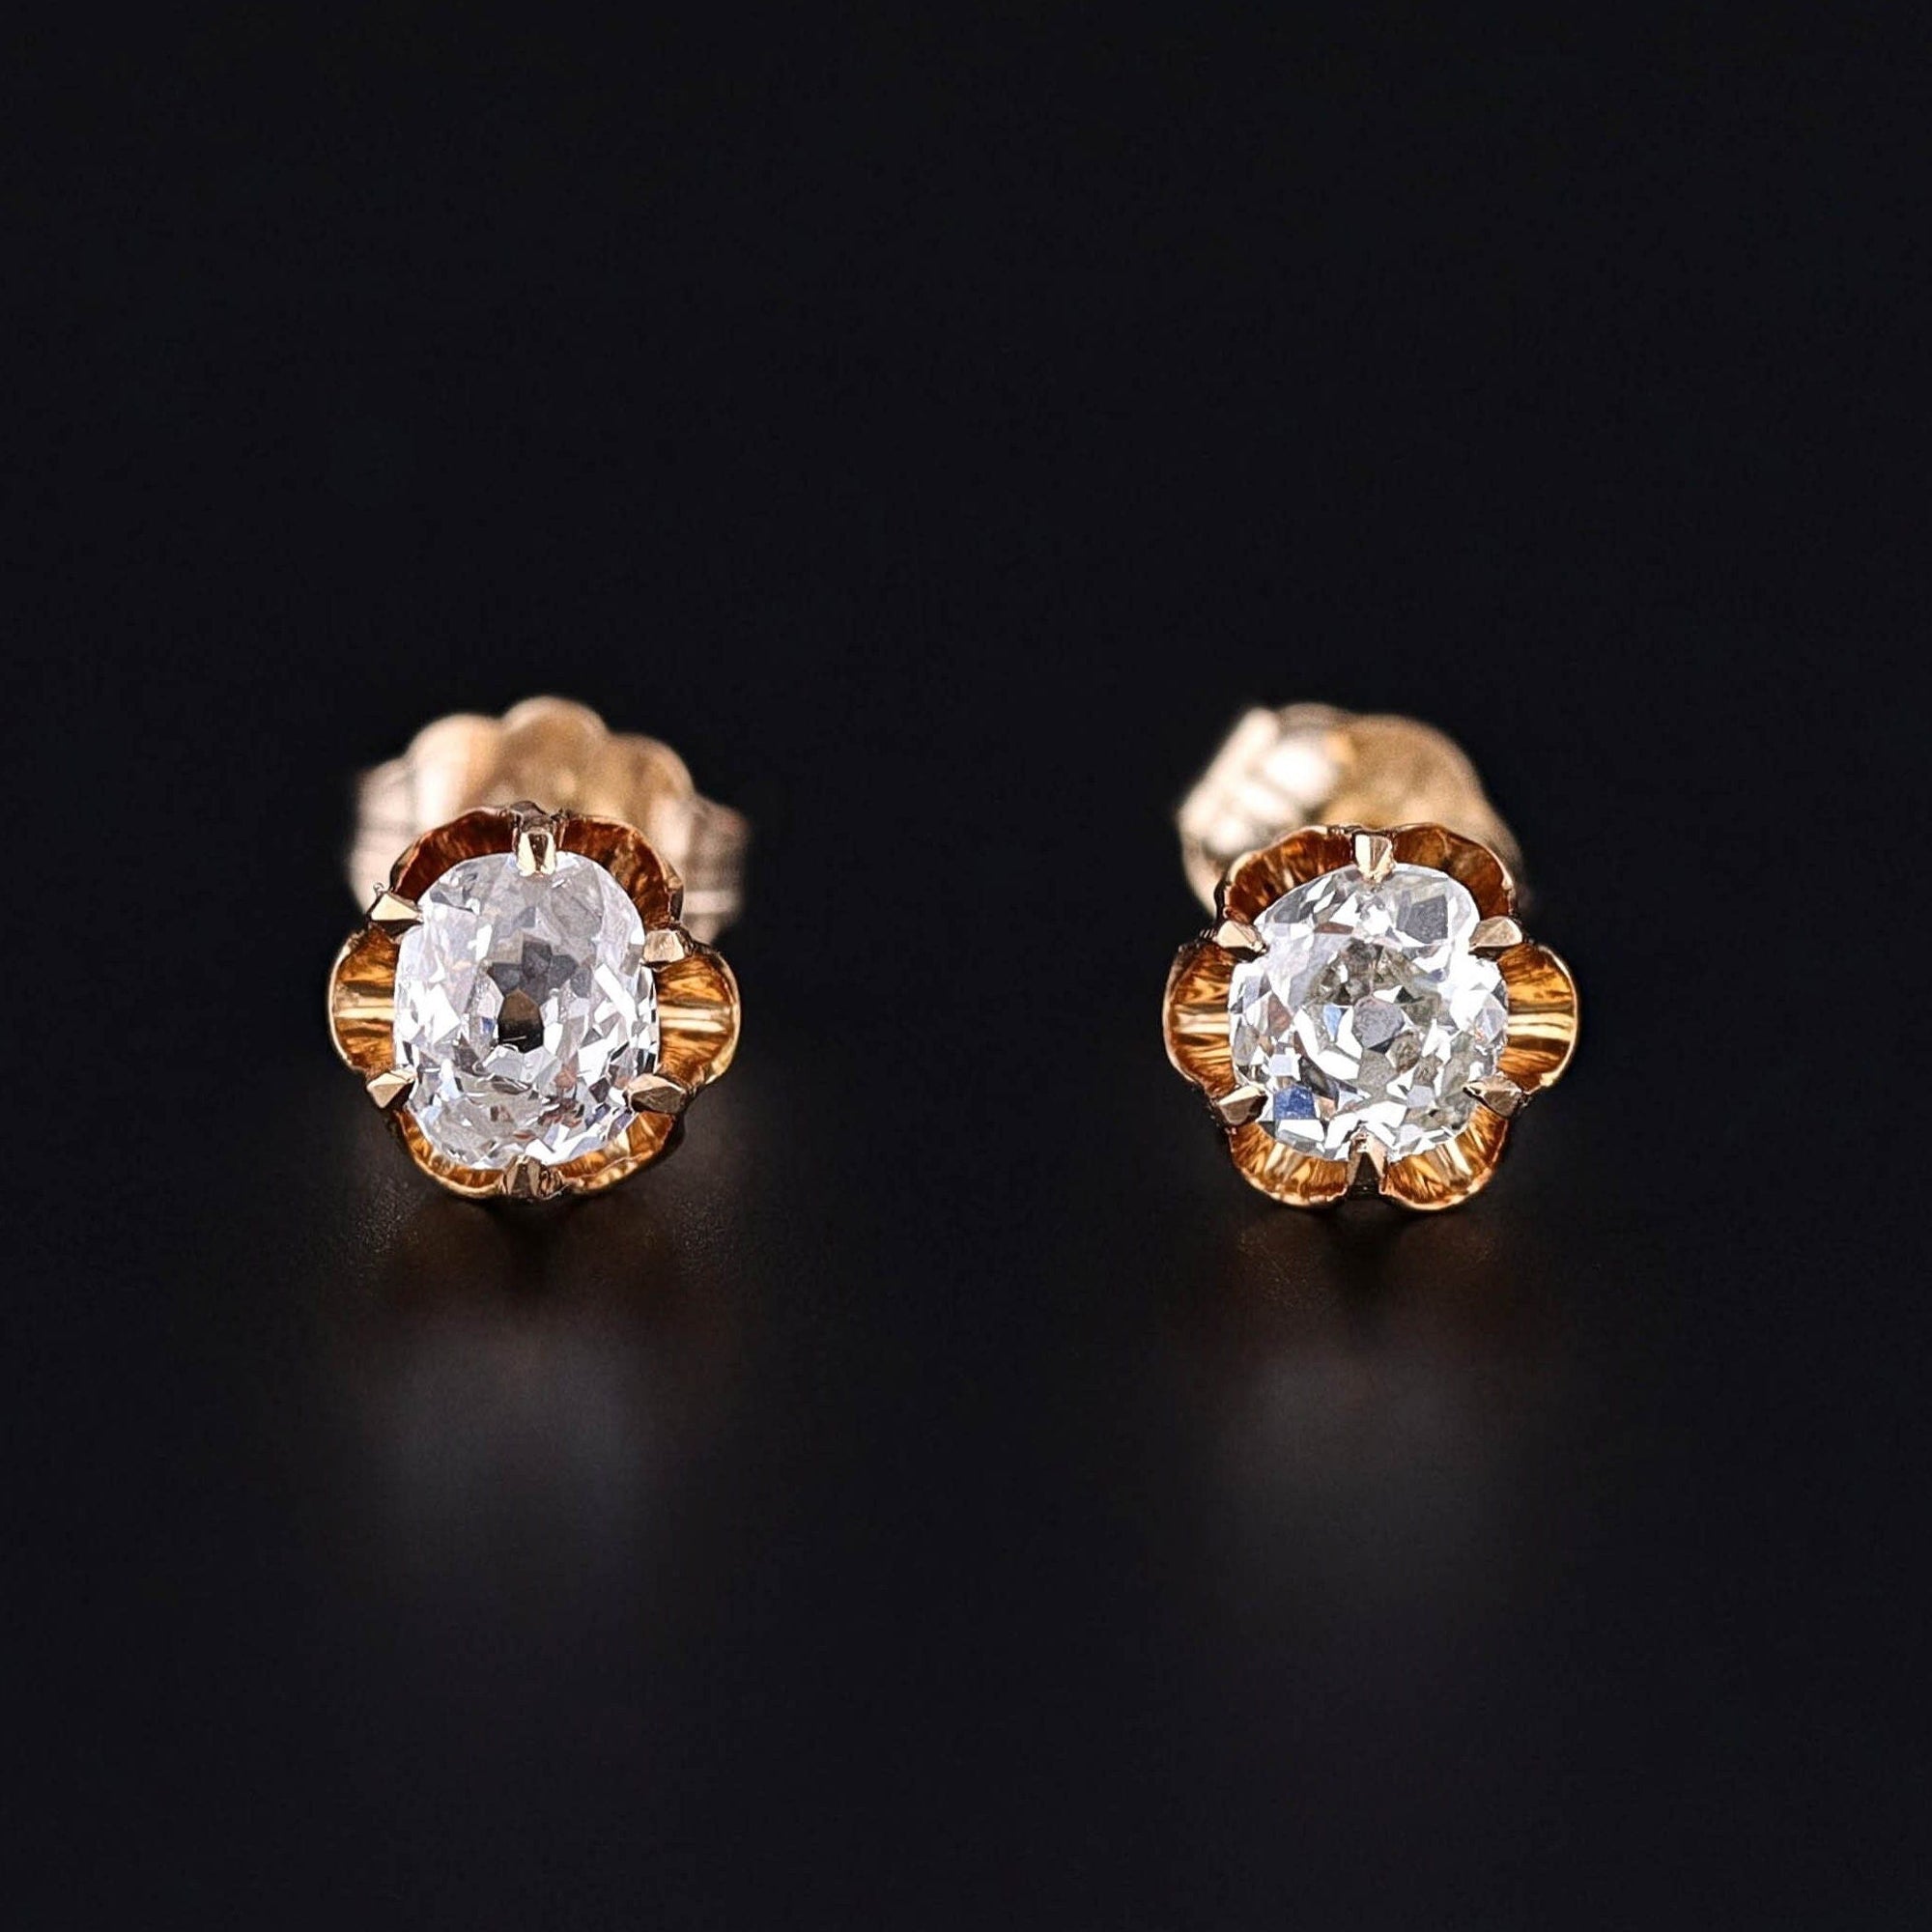 Old Mine Cut Diamond Conversion Earrings in 18k and 14k gold